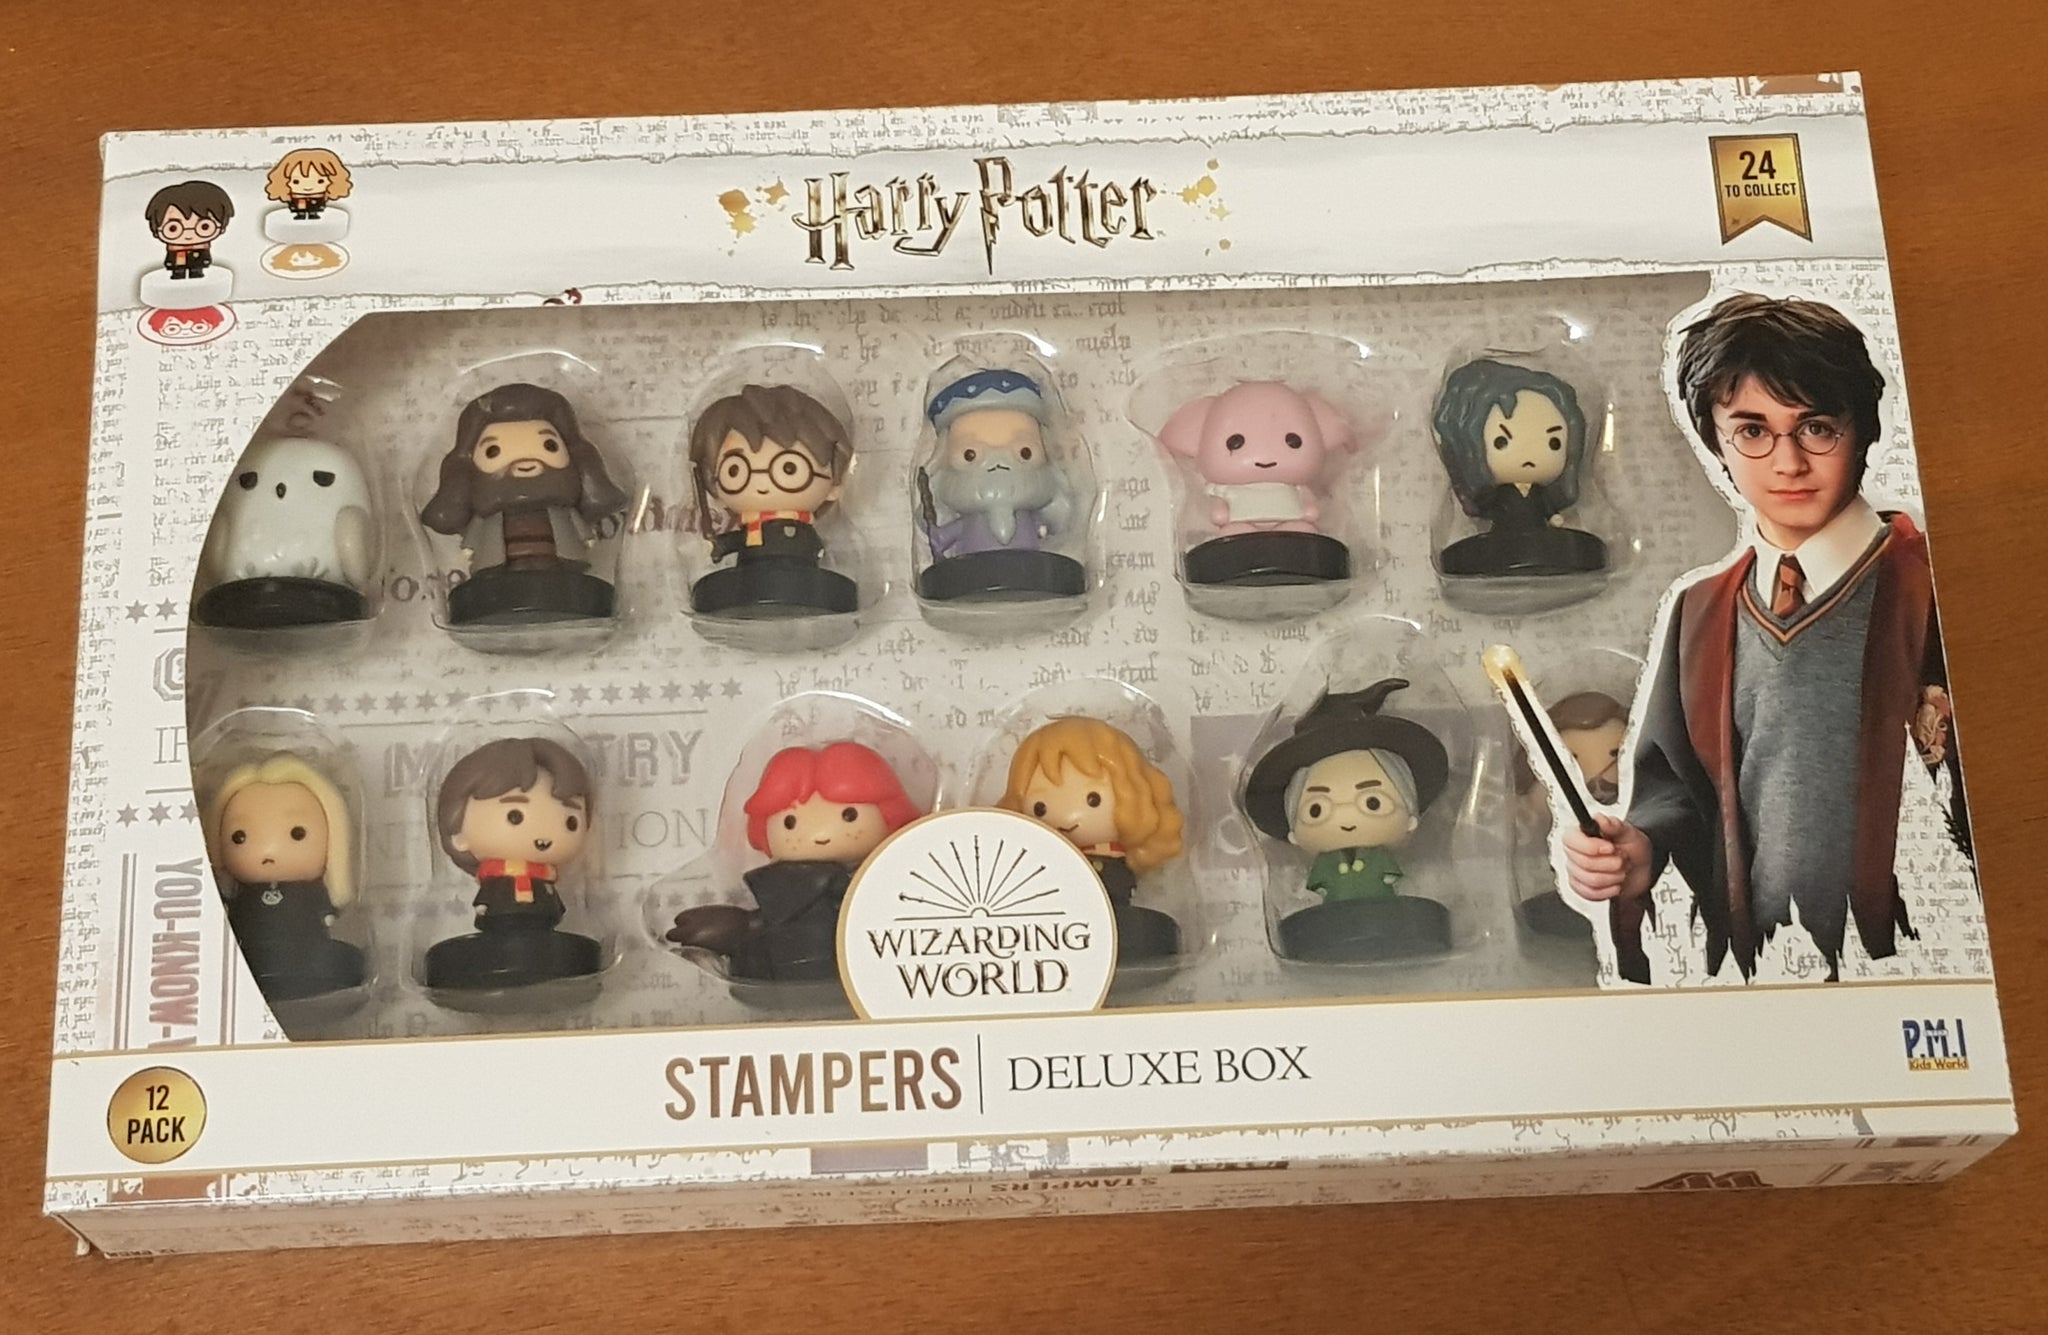 Harry Potter Wizarding World Stampers (12pc) Deluxe Box Set